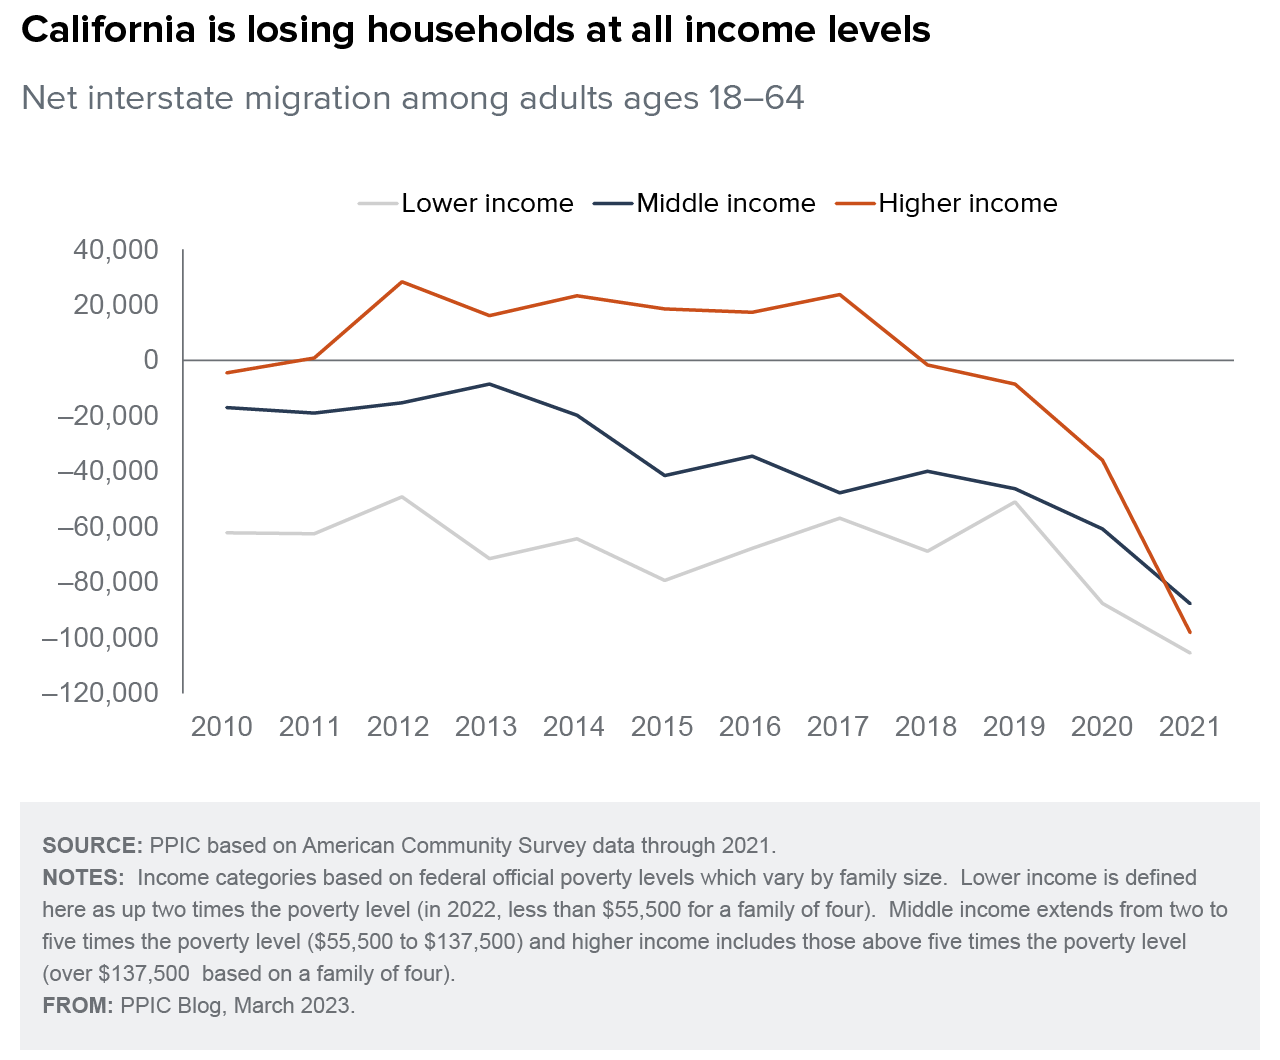 figure - California is losing households at all income levels